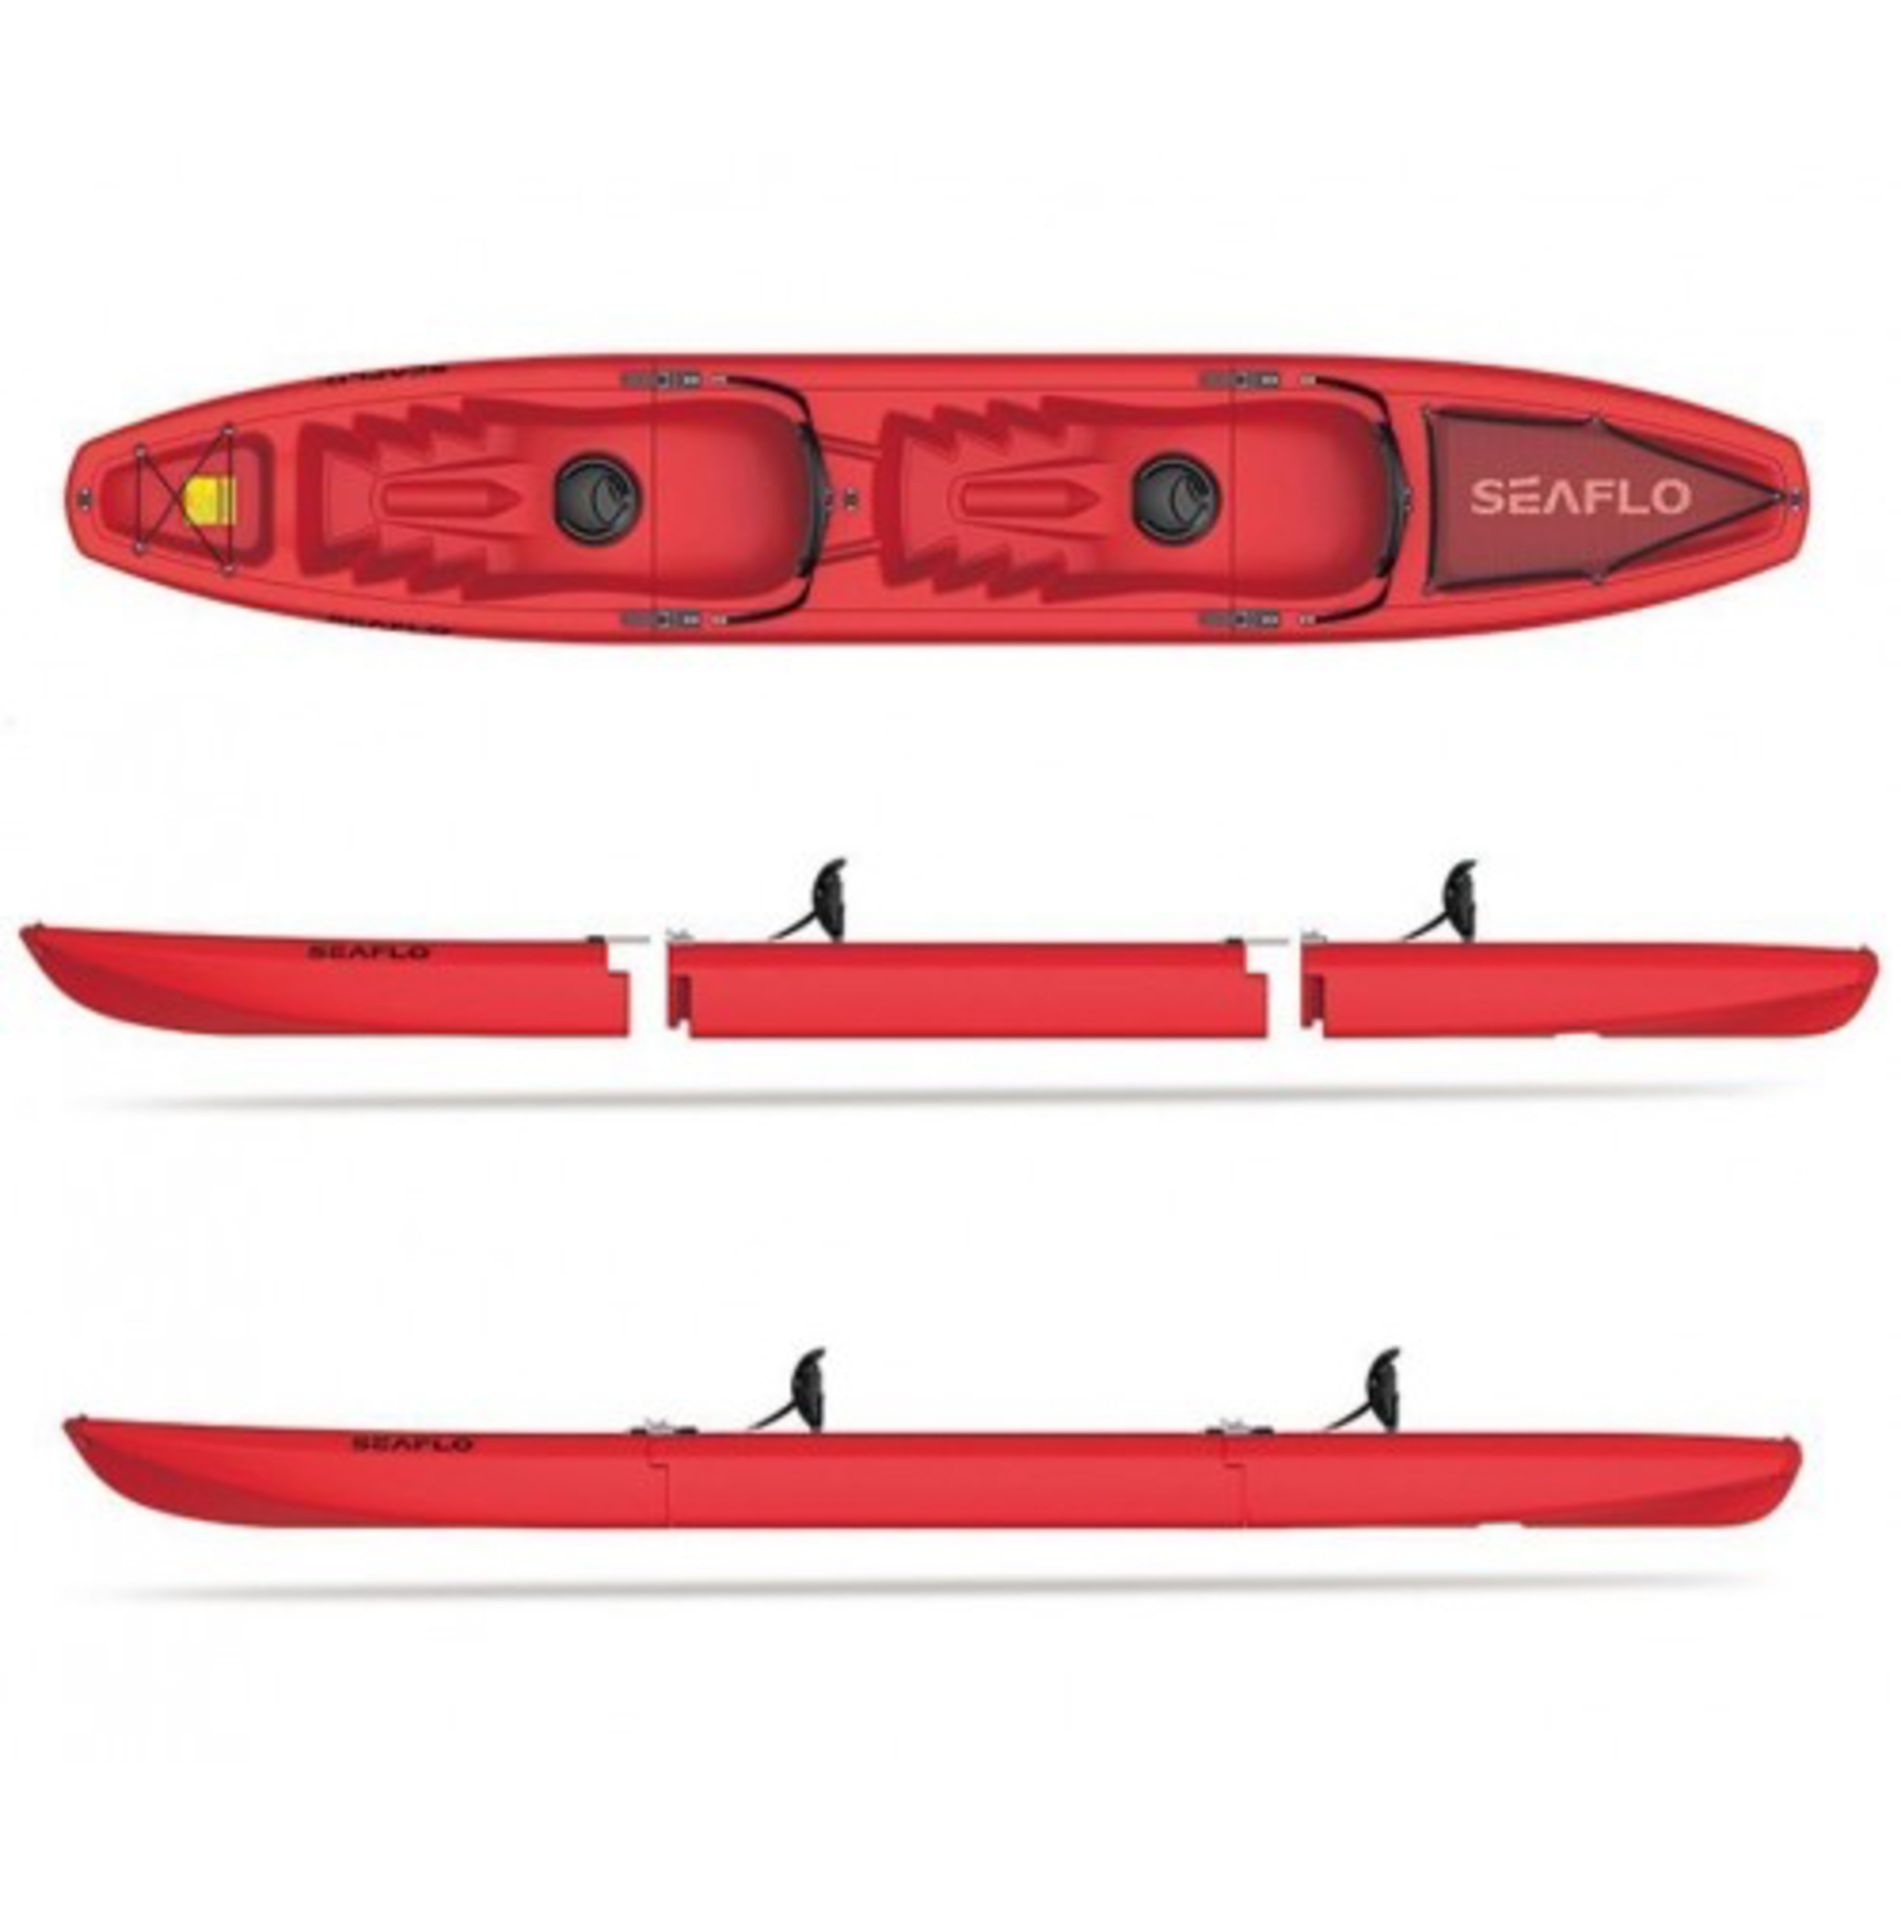 SINGLE OR 2 ADULT SIT ON 3 PIECE KAYAK - QTY: 1 A space saving kayak that is easy to transport as it